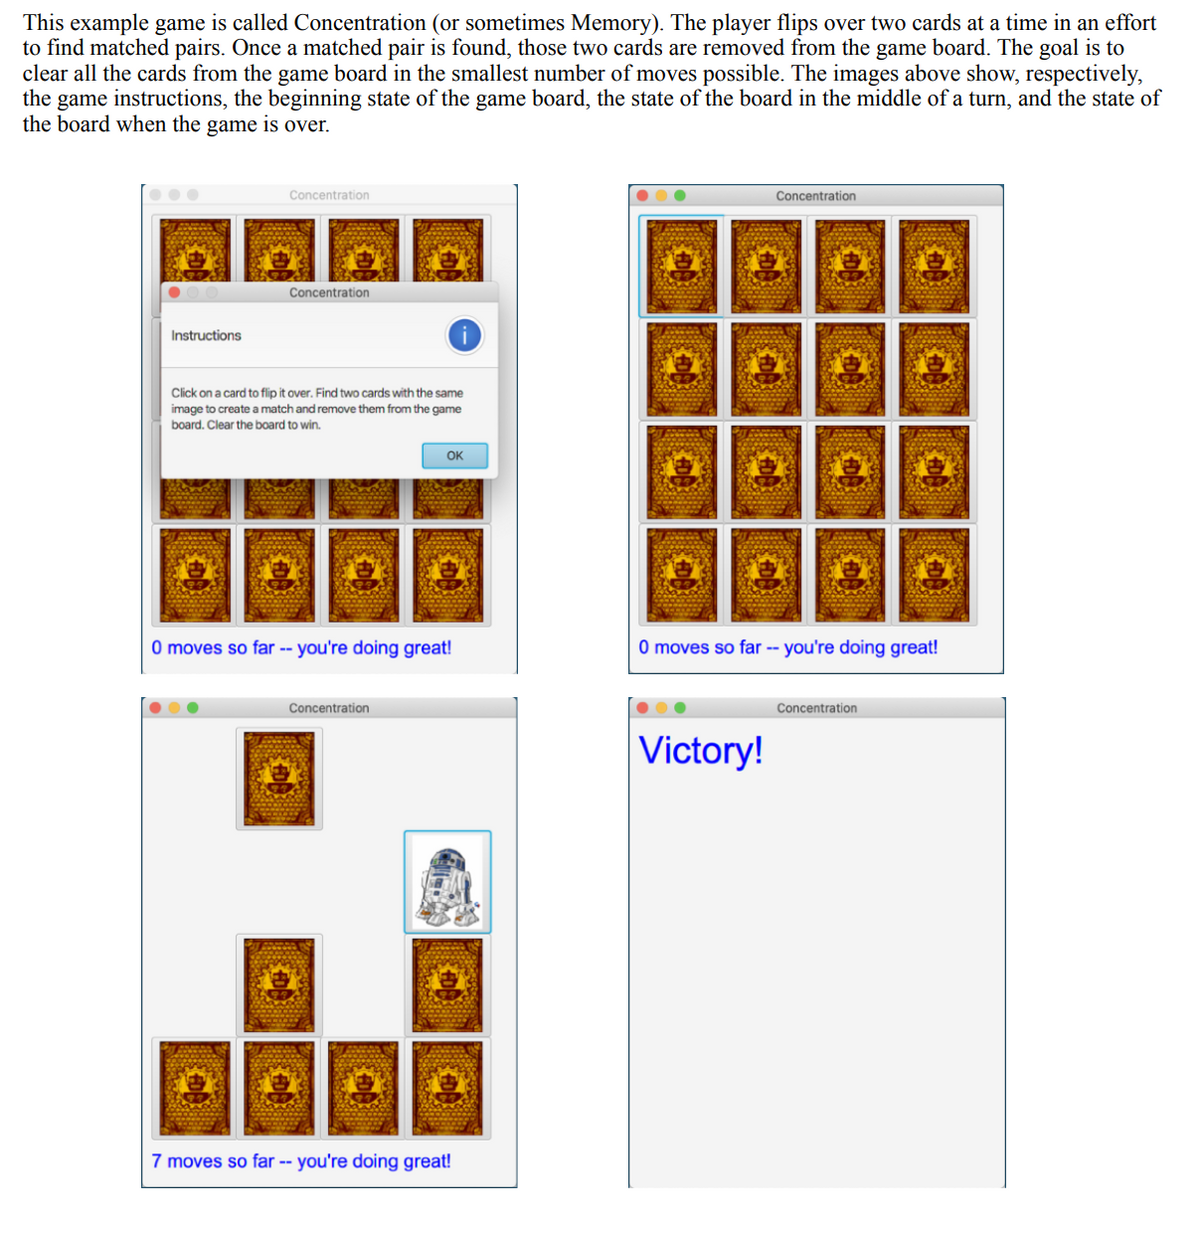 This example game is called Concentration (or sometimes Memory). The player flips over two cards at a time in an effort
to find matched pairs. Once a matched pair is found, those two cards are removed from the game board. The goal is to
clear all the cards from the game board in the smallest number of moves possible. The images above show, respectively,
the game instructions, the beginning state of the game board, the state of the board in the middle of a turn, and the state of
the board when the game is over.
Instructions
Concentration
Concentration
Click on a card to flip it over. Find two cards with the same
image to create a match and remove them from the game
board. Clear the board to win.
OK
O moves so far -- you're doing great!
Concentration
G
7 moves so far -- you're doing great!
Concentration
EDA
0 moves so far -- you're doing great!
Victory!
Concentration